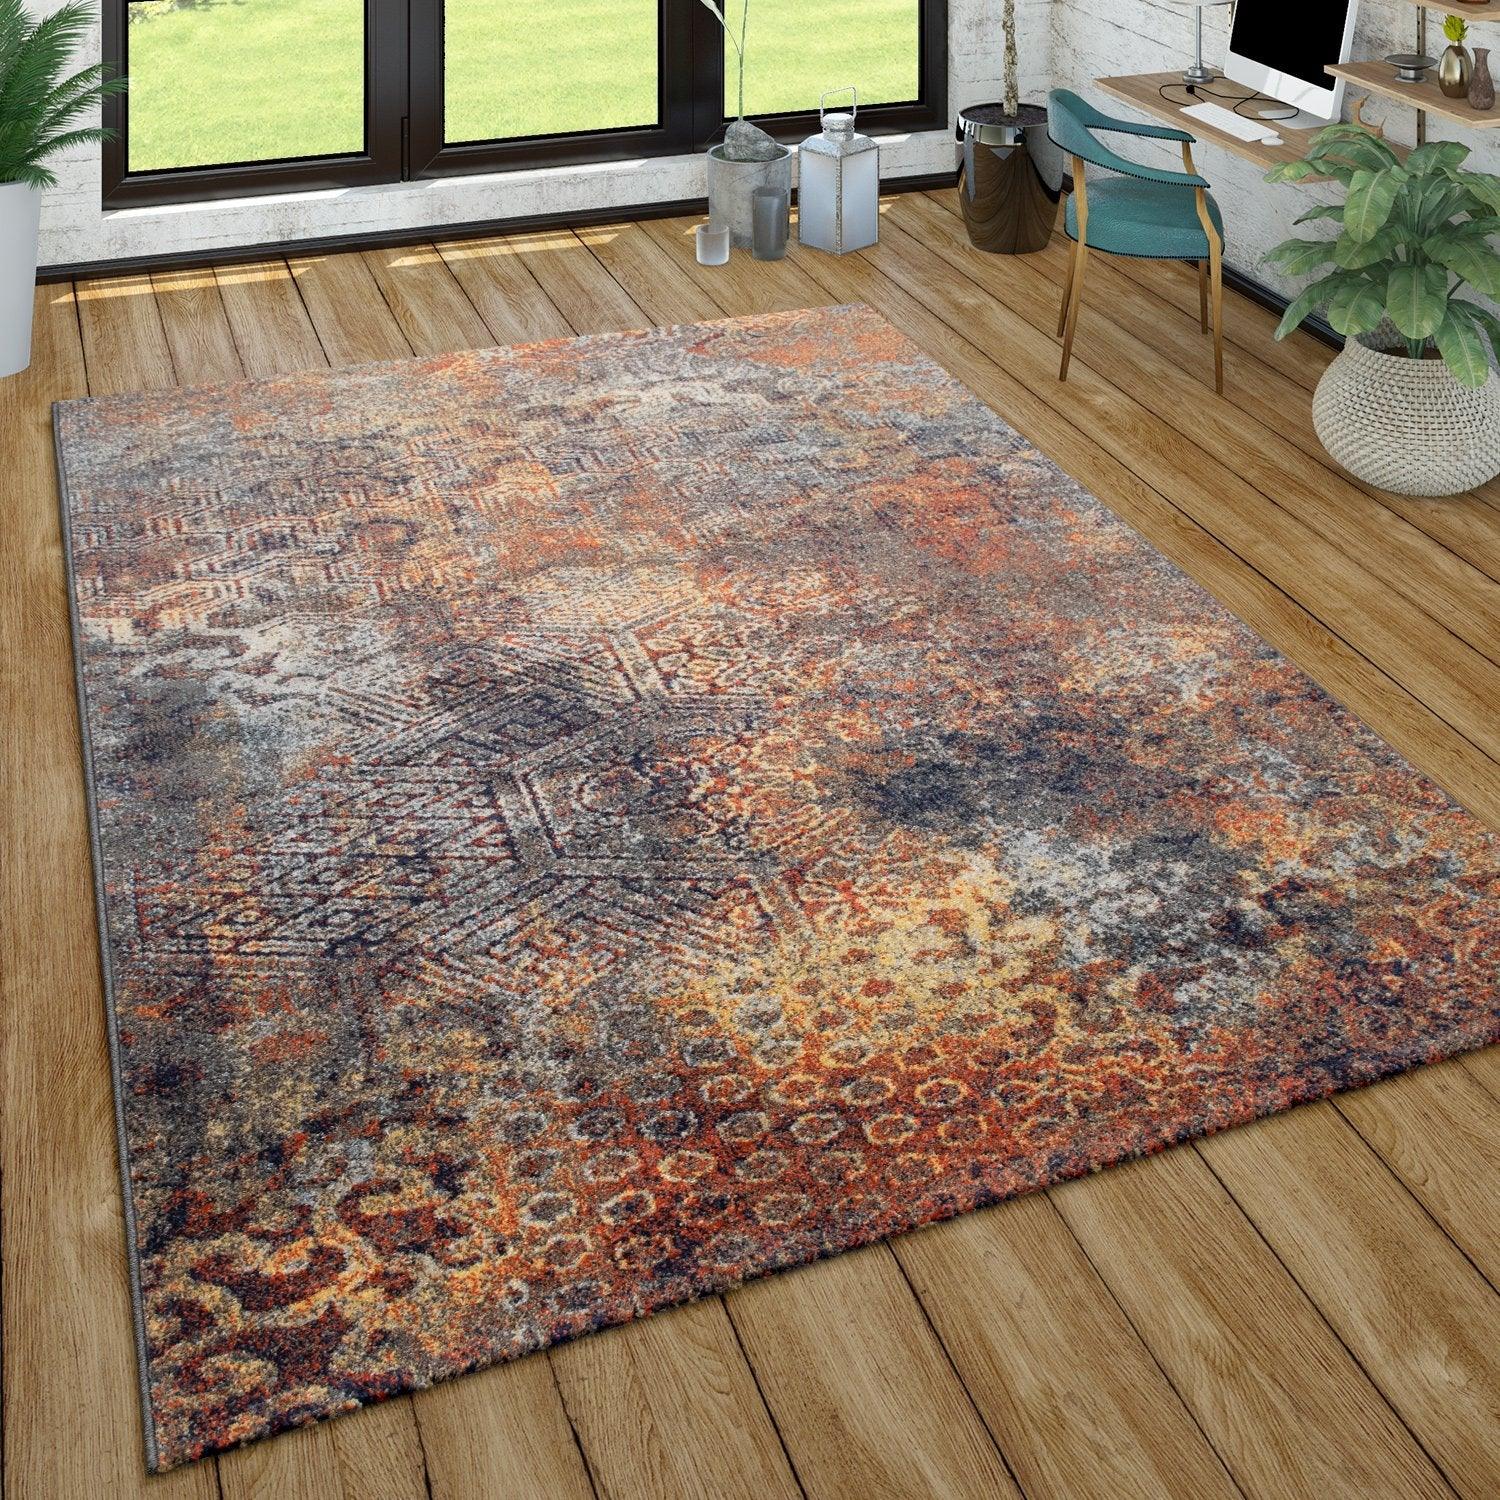 Living Room Rug used Look Industrial Style Multicolored 2' x 3'3